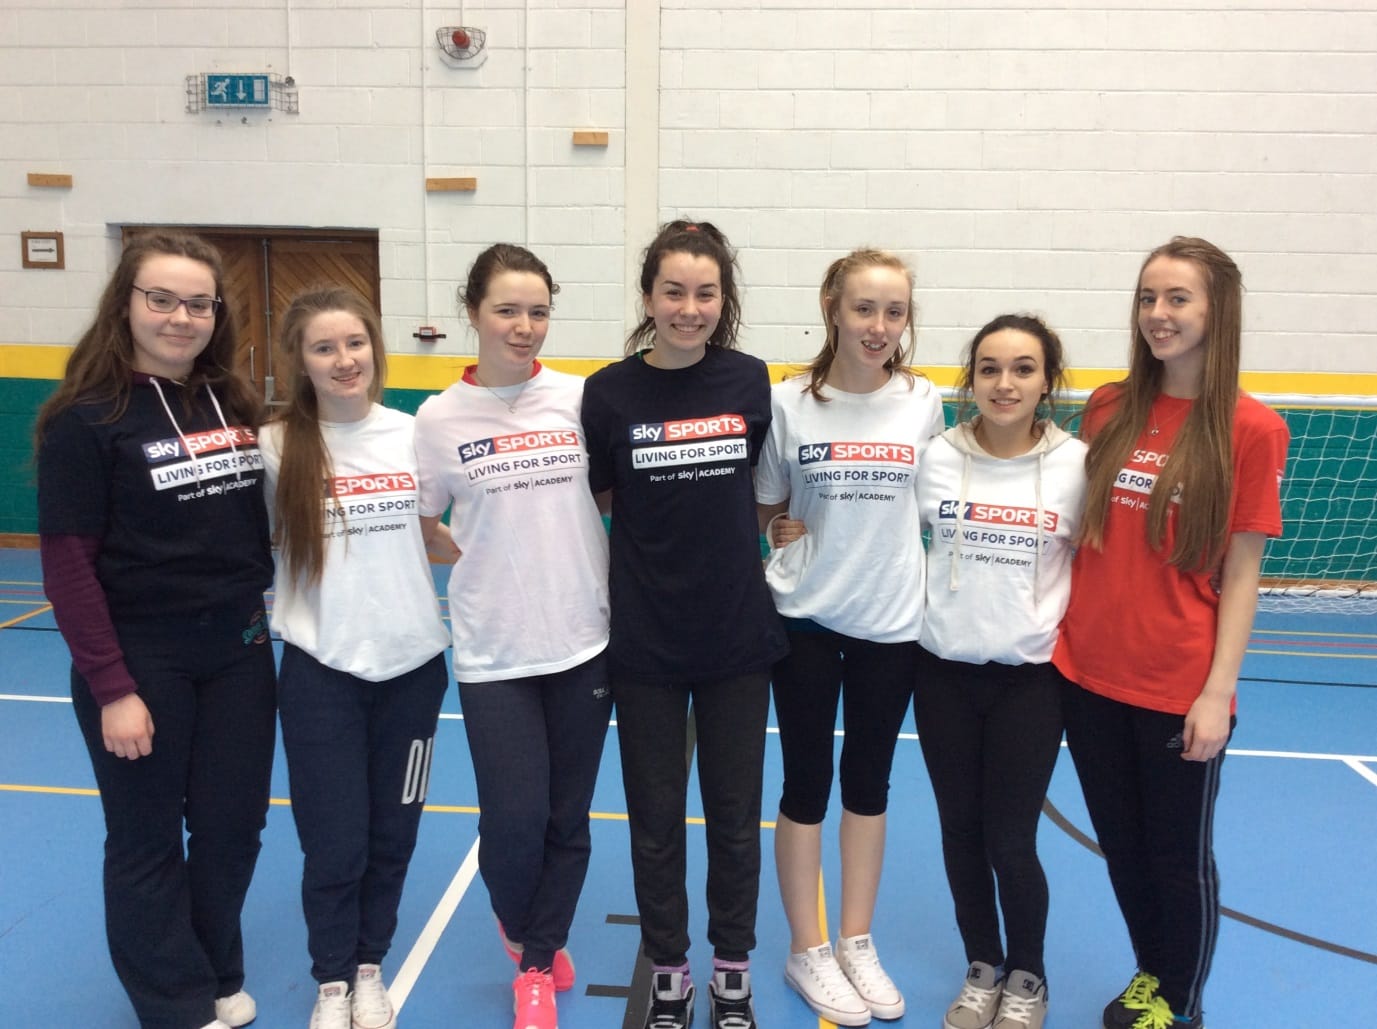 Feb 2016: Chloe Collins, Sara Flately, Ciara Noonan, Stacey Flynn, Shauna Hallinan, Kara White and Orla Wrenn pictured during leadership training as part of SKY SPORTS living for sports programme